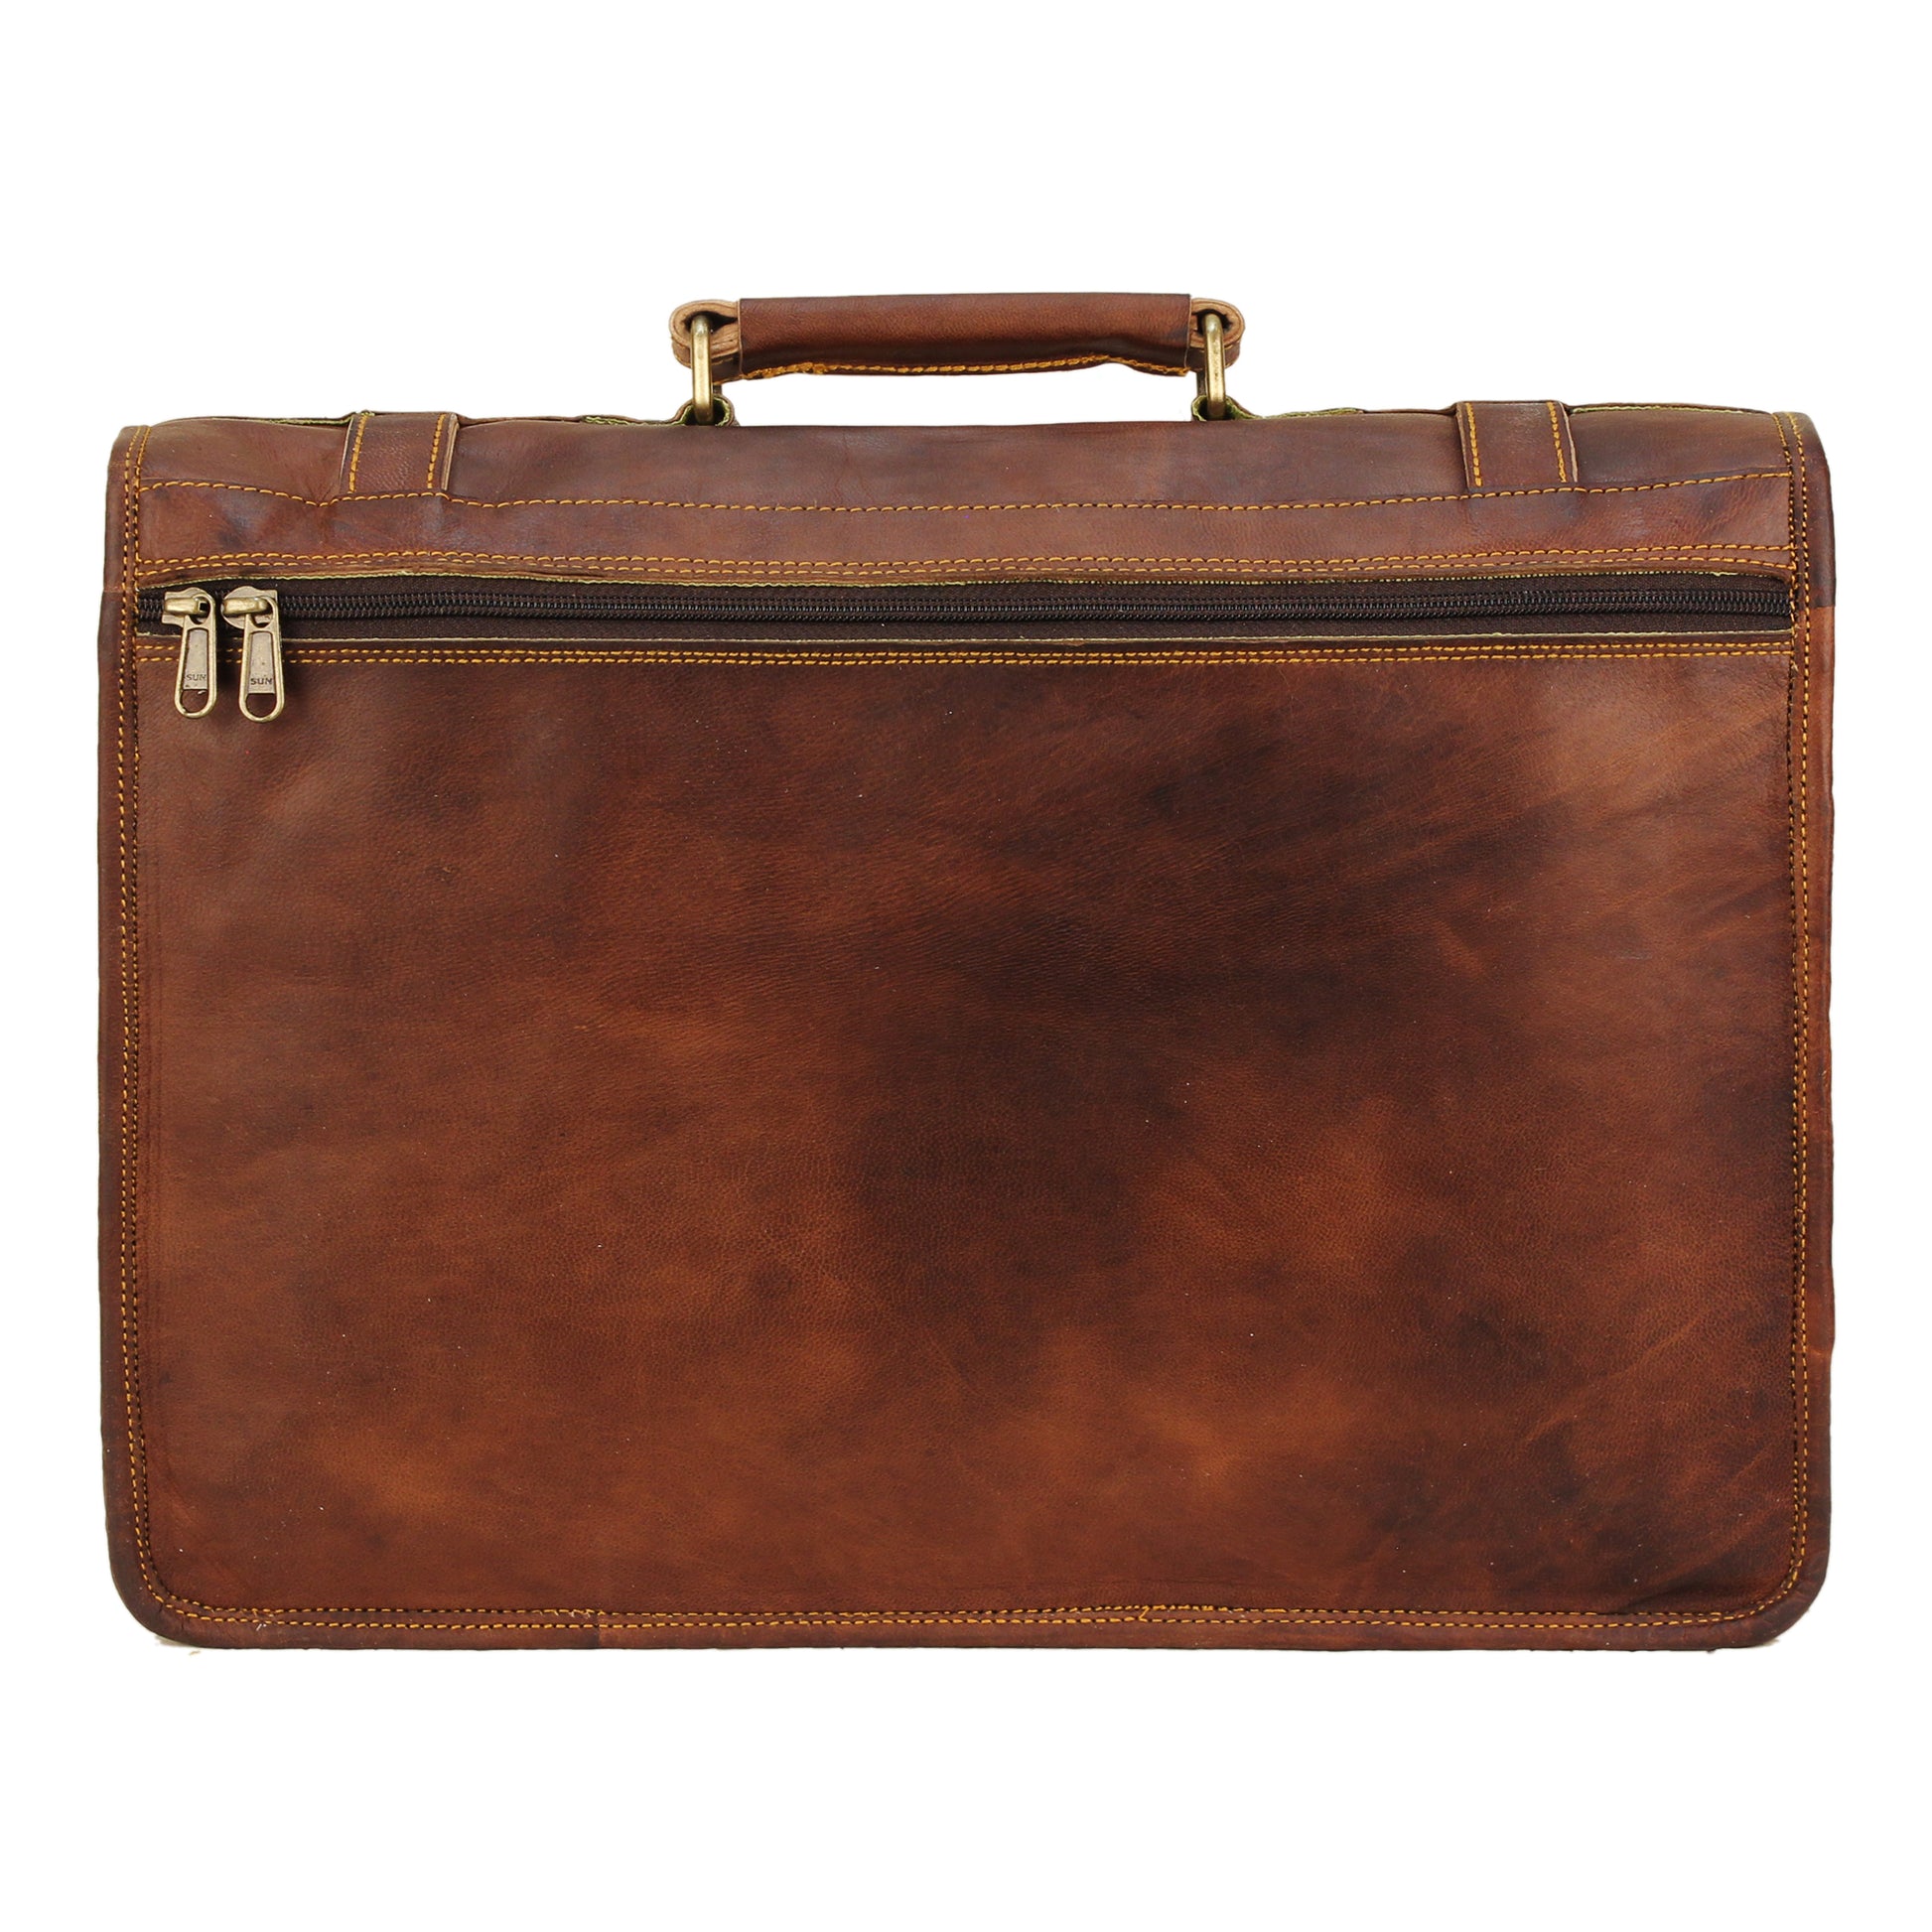 leather briefcase bag with top handle